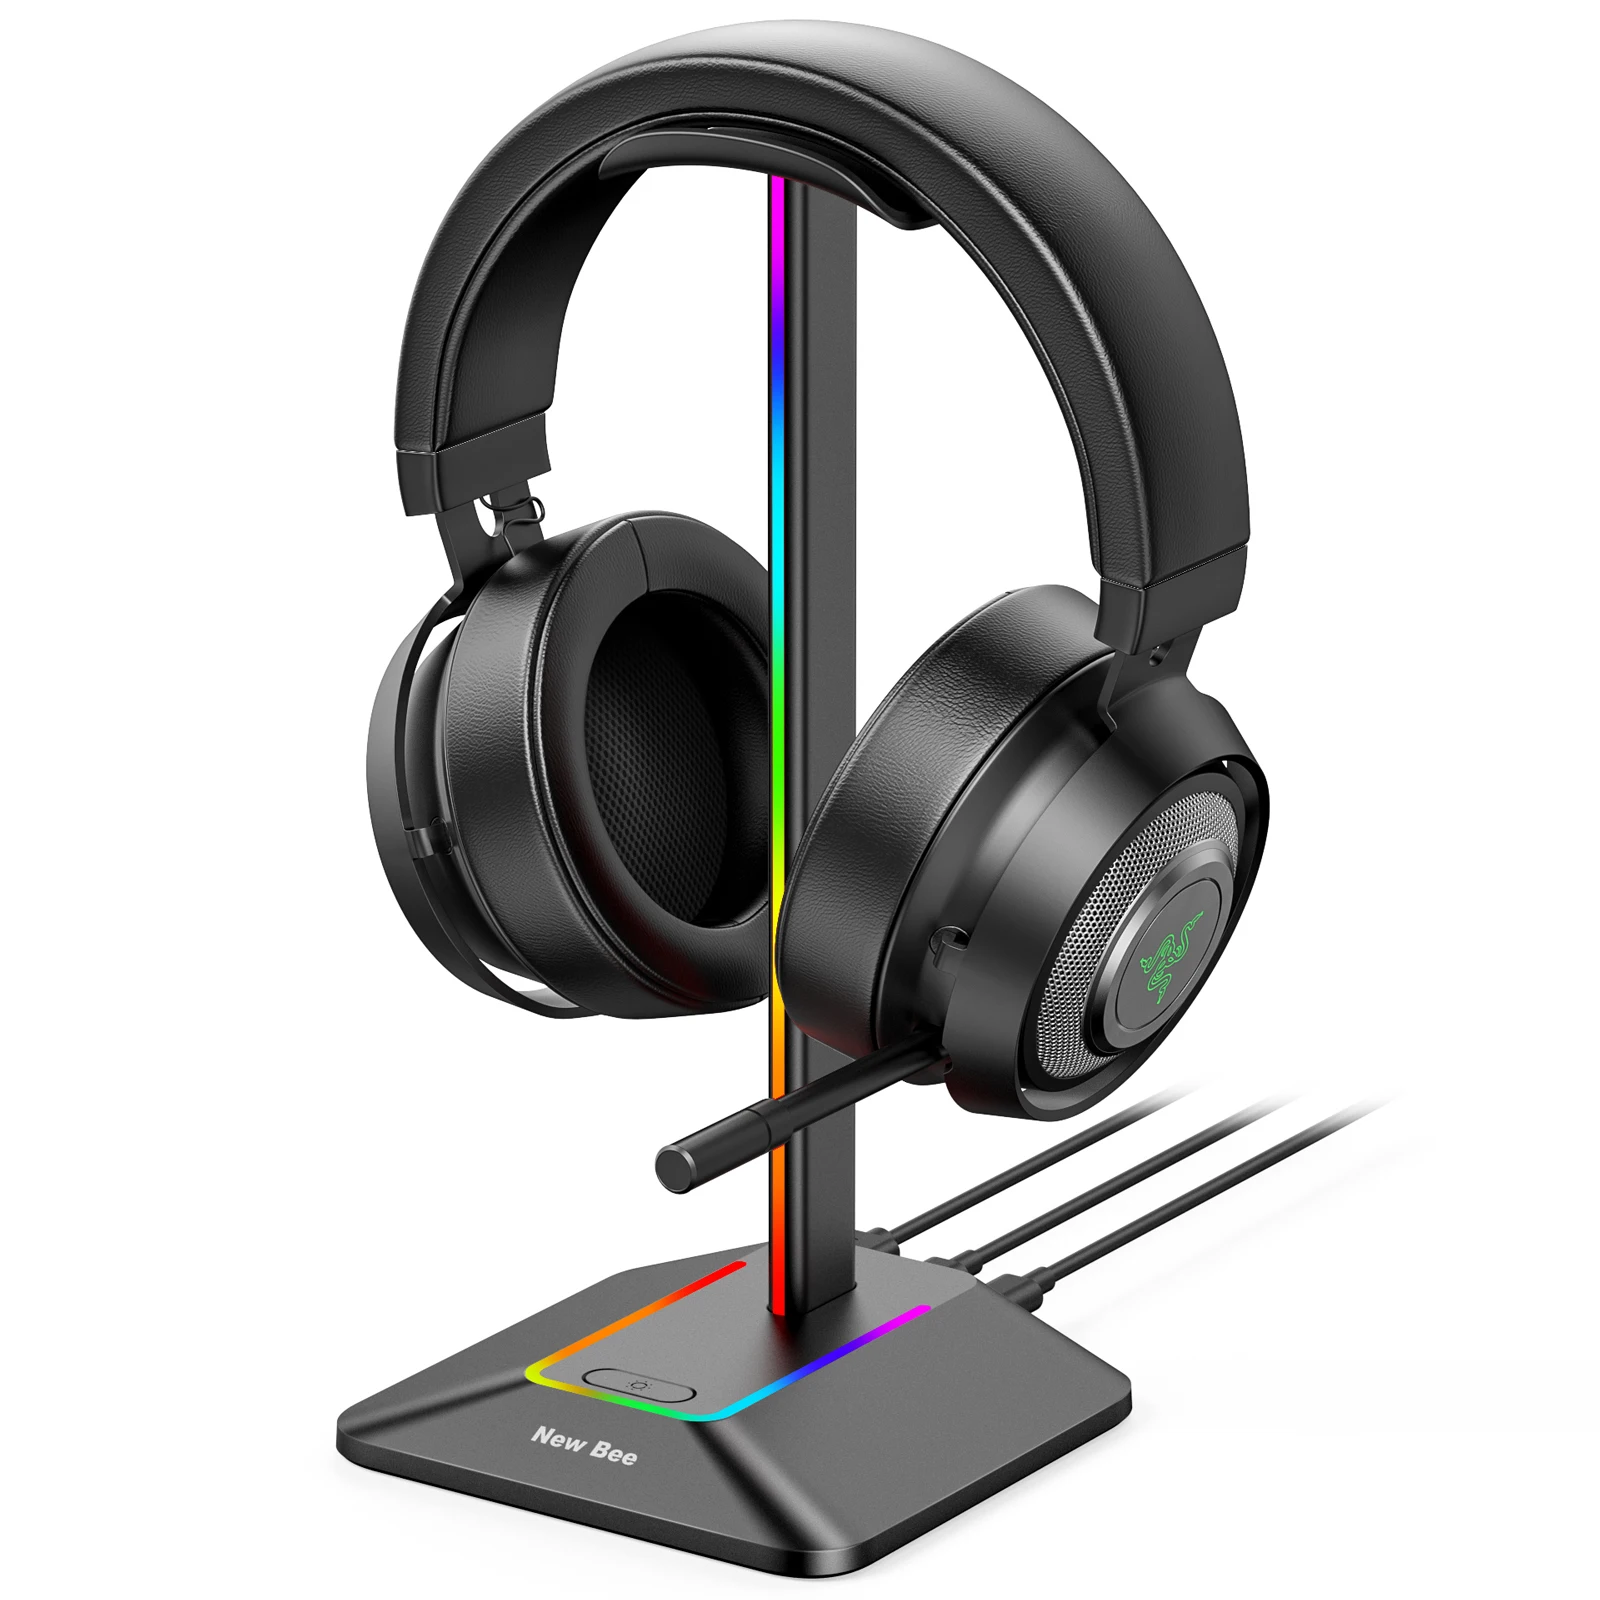 

New Bee NB-Z8 rgb Gaming Headset Stand Earphone Holder for Rgb Lamp Desk PC Headphone Holder with Usb Charger, Black sliver